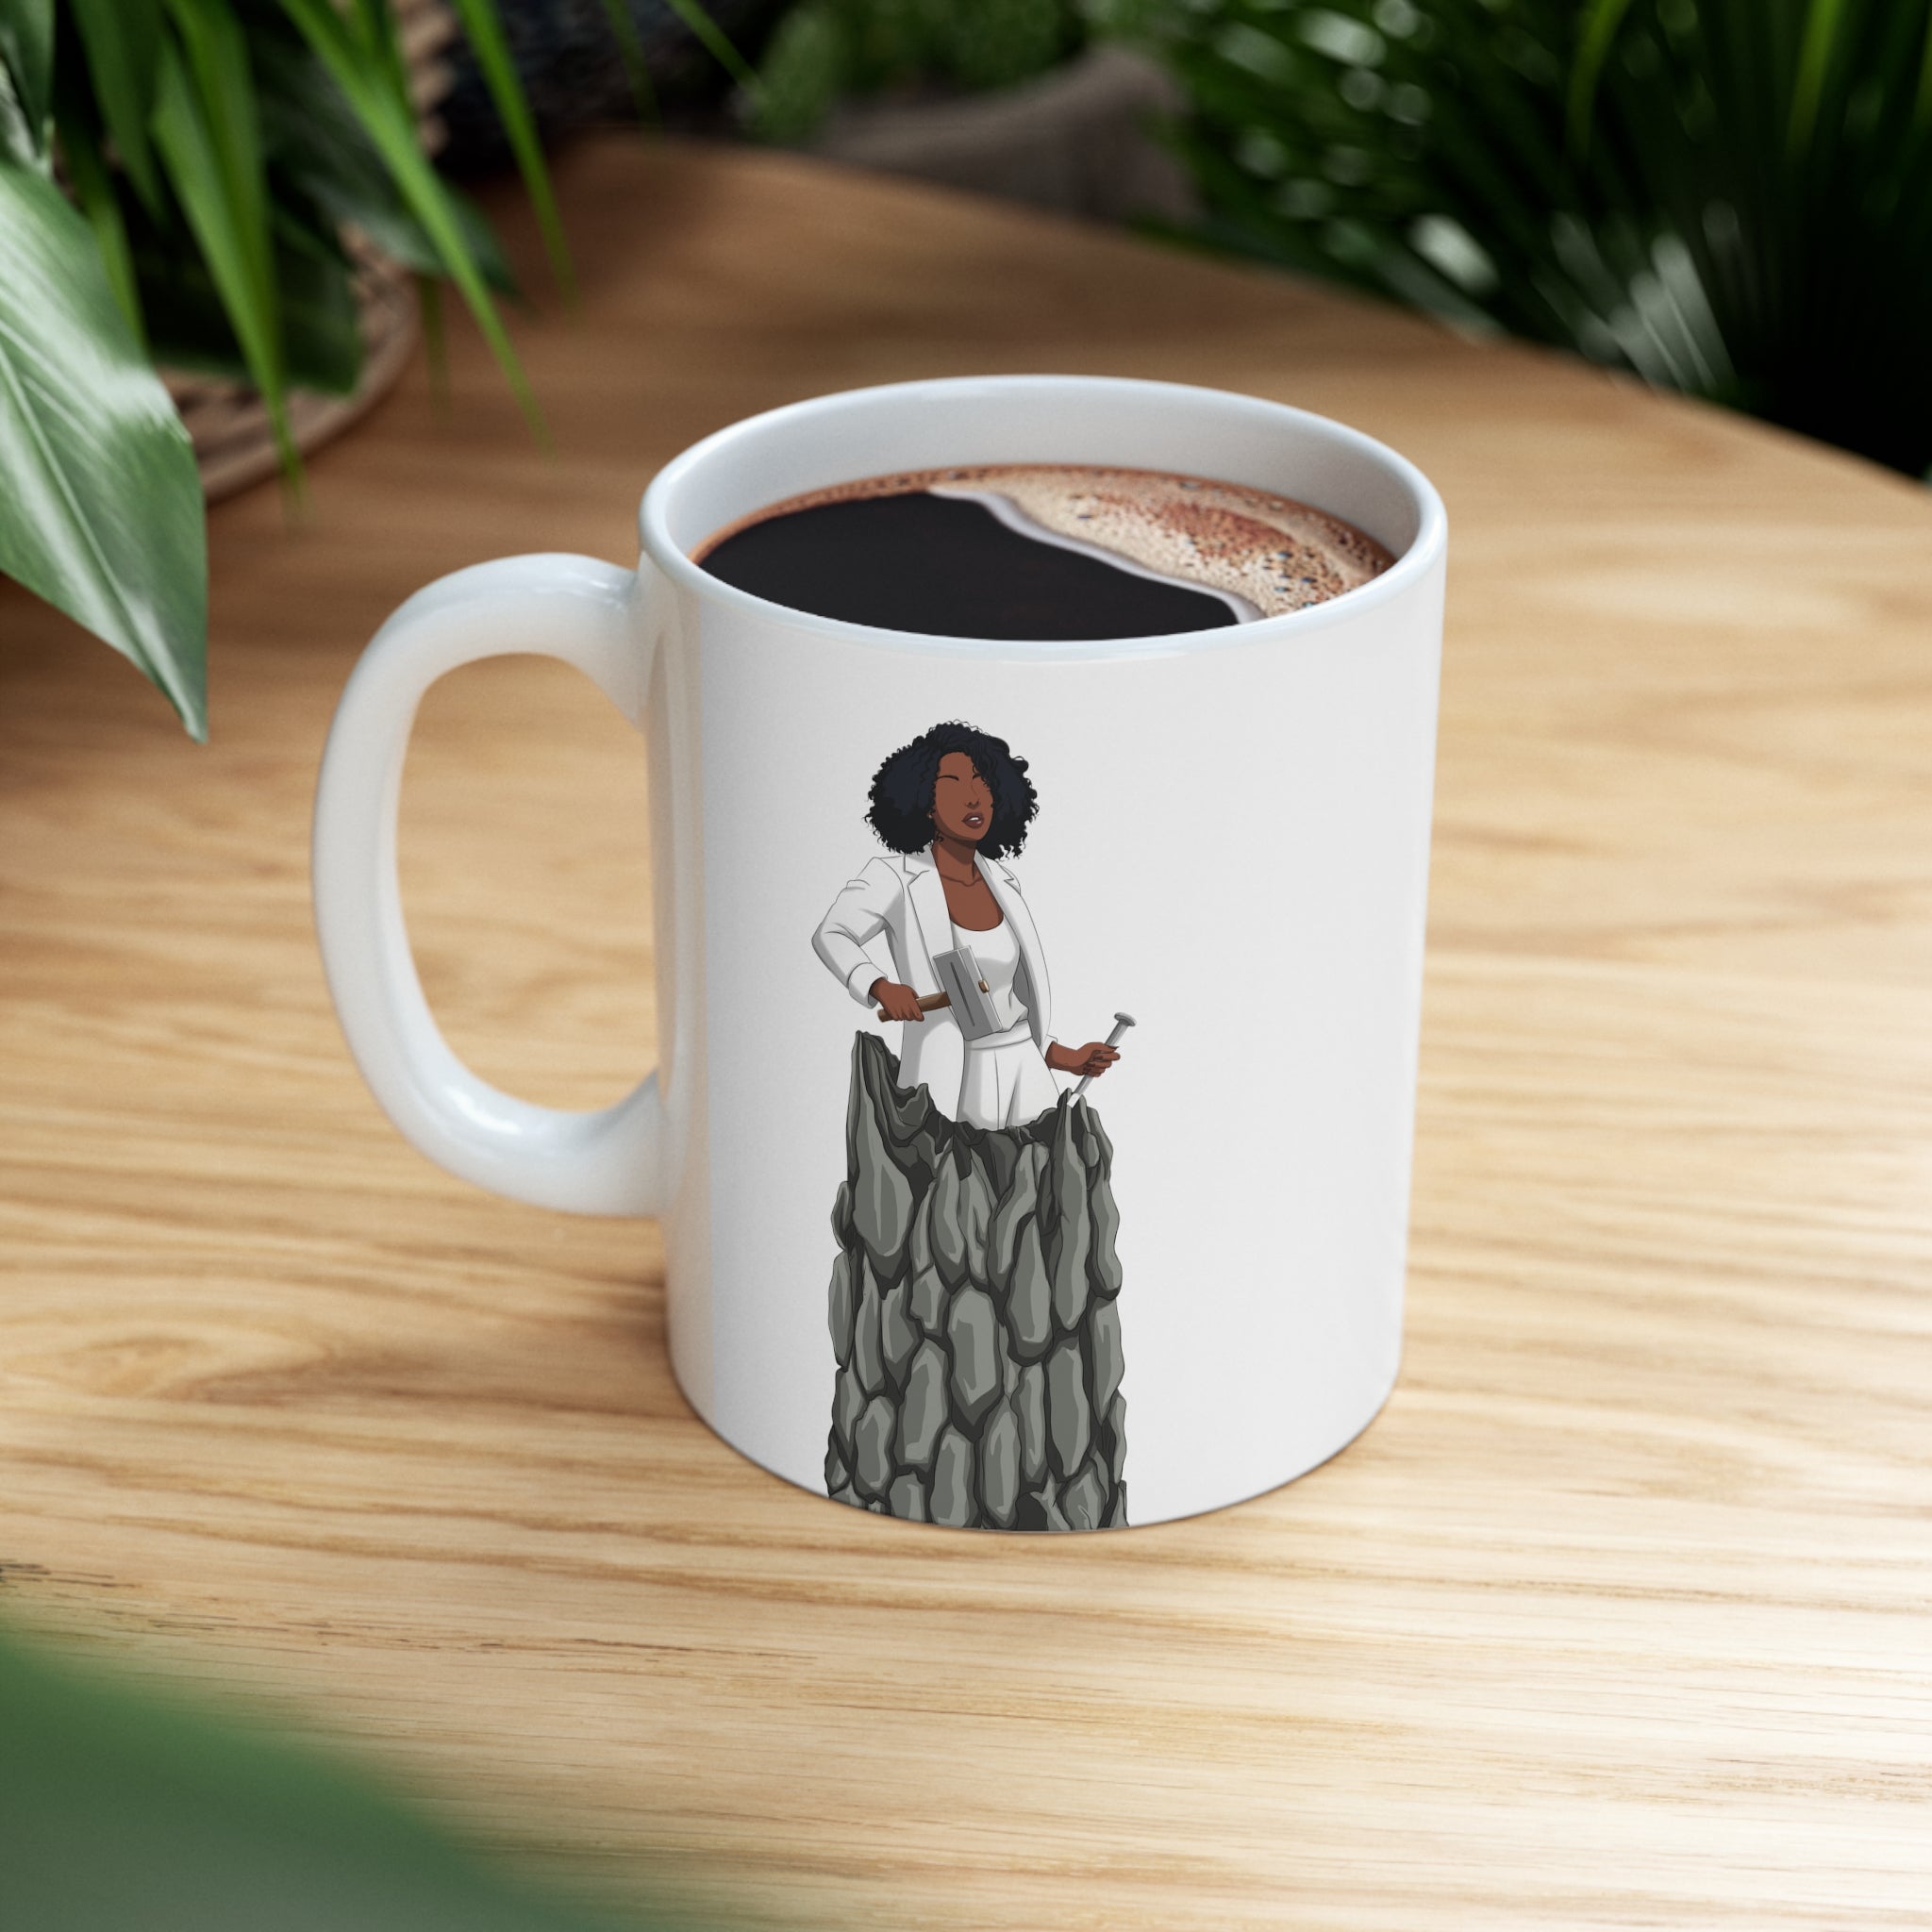 A person working hard to better his/herself - Ceramic Mug 11oz - Self-Made Woman #12 - Breakthrough Collection